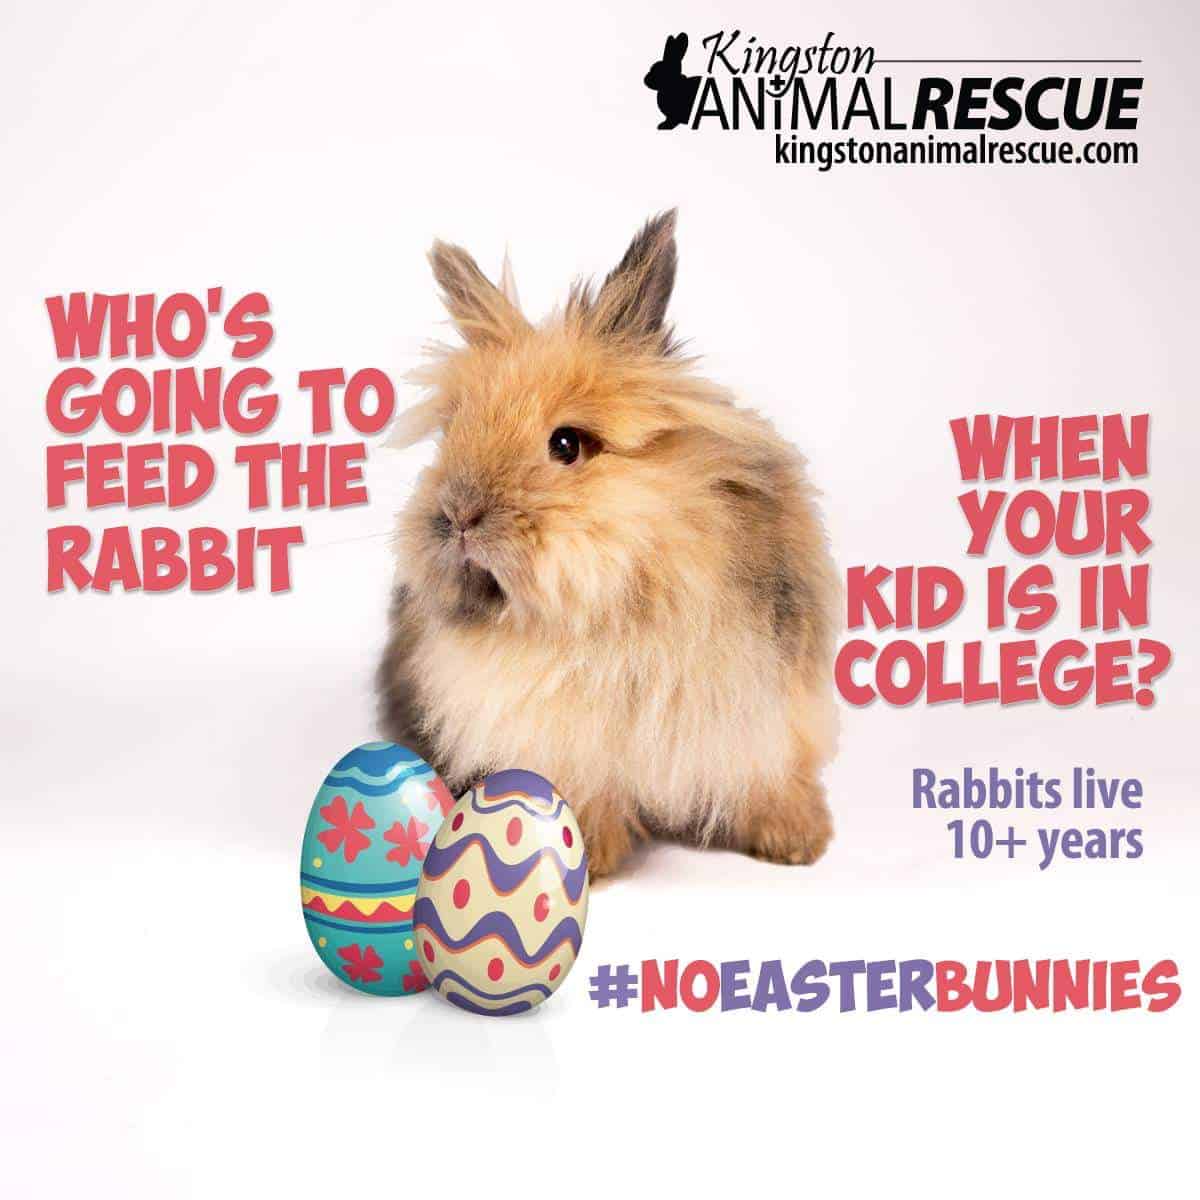 "Who's going to feed the rabbit when your kid is in college. Rabbits live 10+ years"